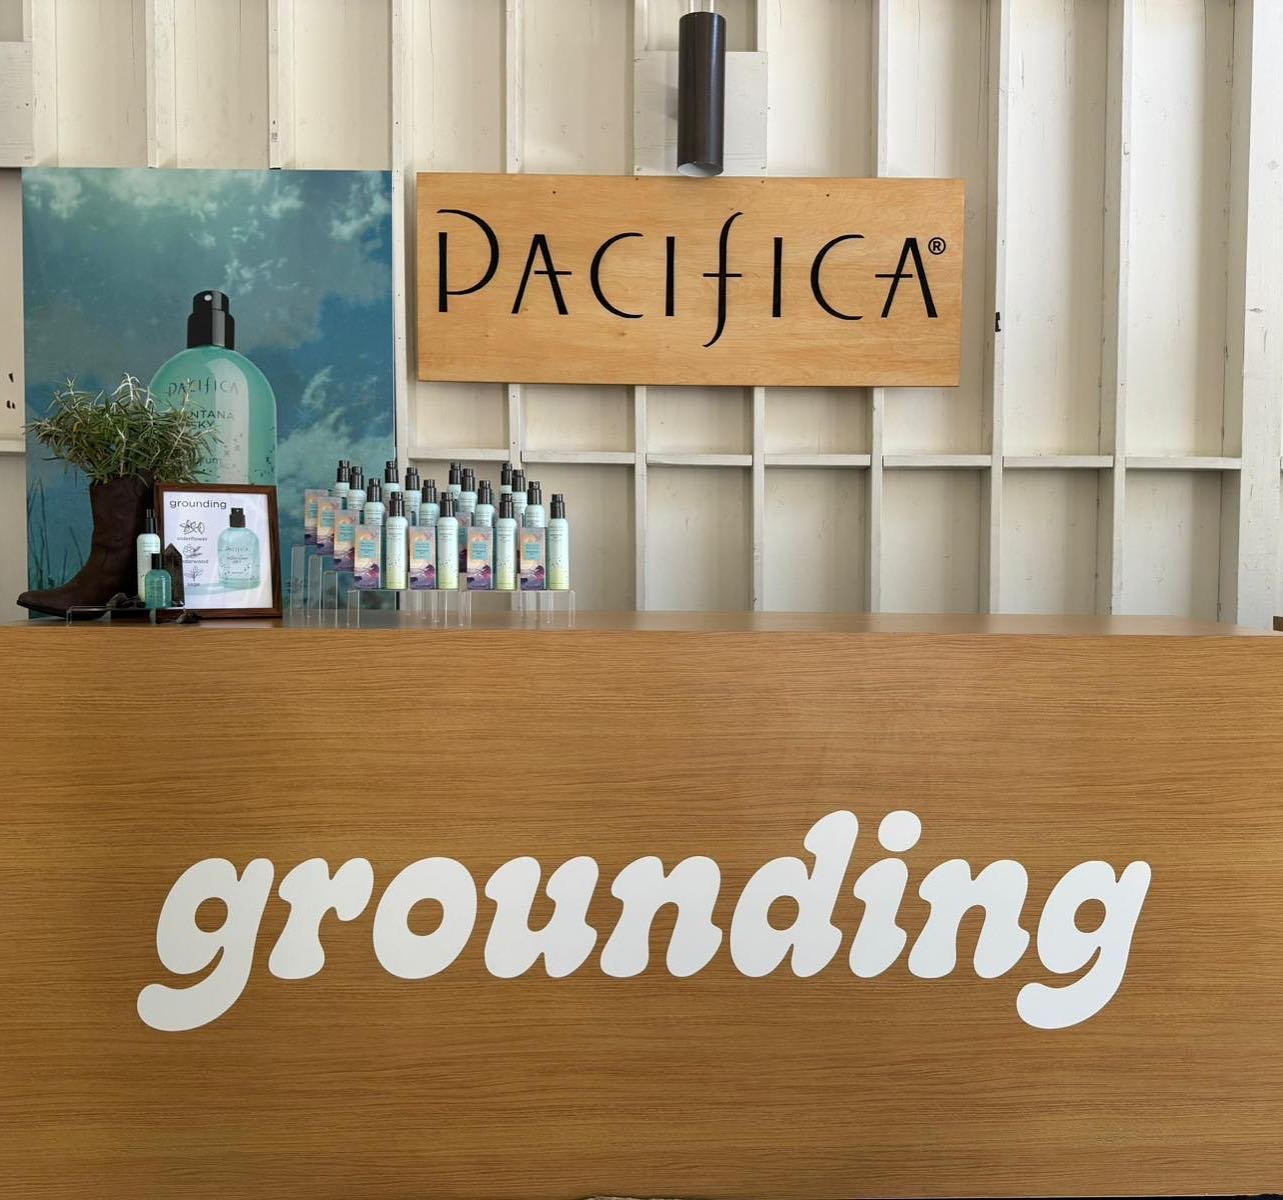 We kicked off #coachella designing a dreamy gifting suite for @pacificabeauty! Guests were invited to be receive so many products that are all 100% vegan and cruelty-free. In between, there were aura readings, ice cream, beverages and good music. Tha